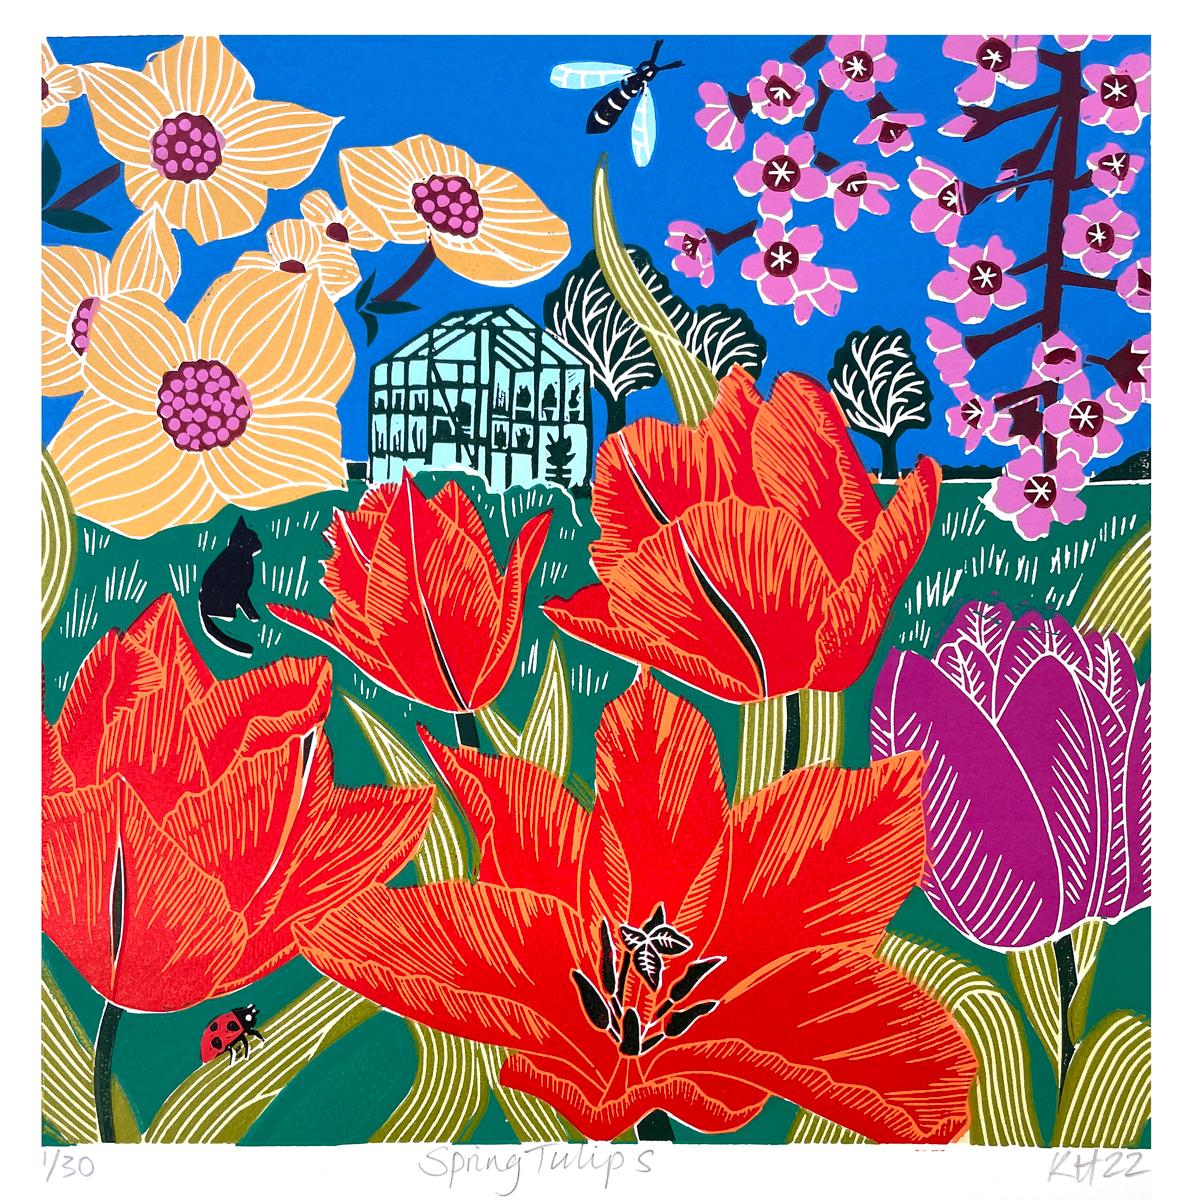 Spring Tulips [2022]
limited_edition and hand signed by the artist 

Oil based inks on 300GSM Somerset Velvet Paper

Edition number 30

Image size: H:30 cm x W:30 cm

Complete Size of Unframed Work: H:40 cm x W:40 cm x D:0.5cm

Sold Unframed

Please